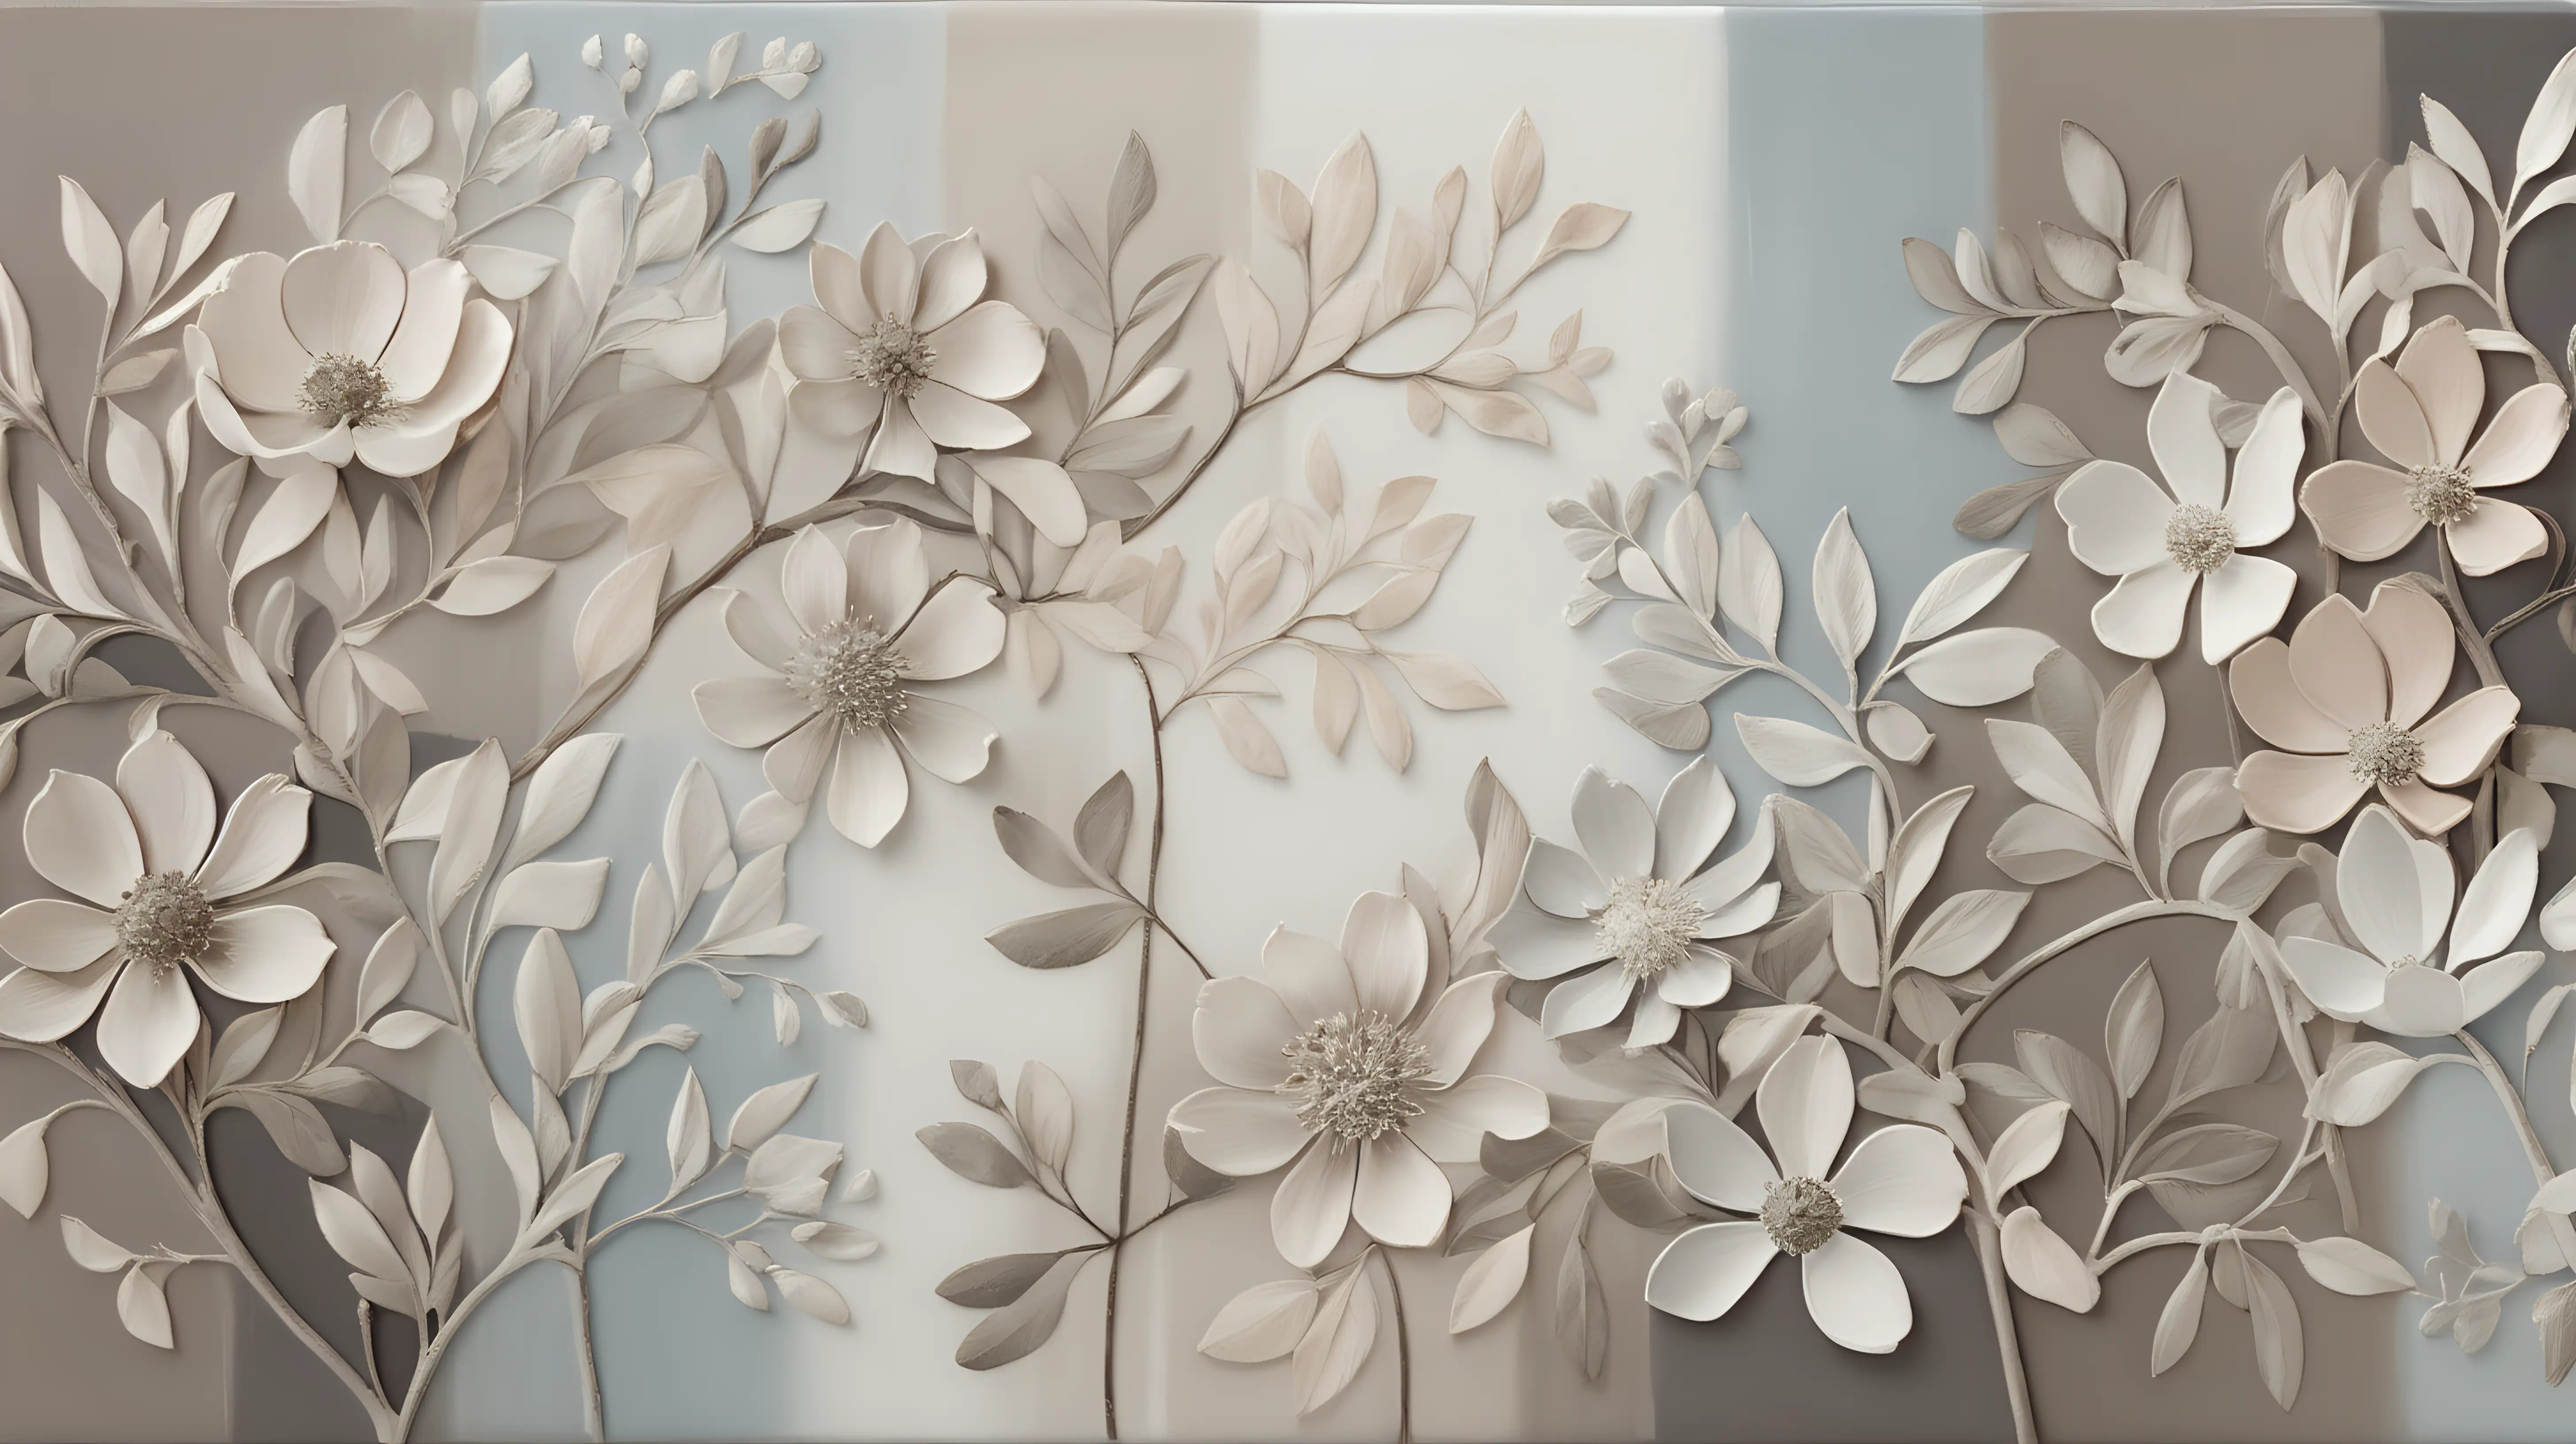 Delicate botanical shapes in muted tones intertwine and blossom across the canvas, offering a calming and organic feel.